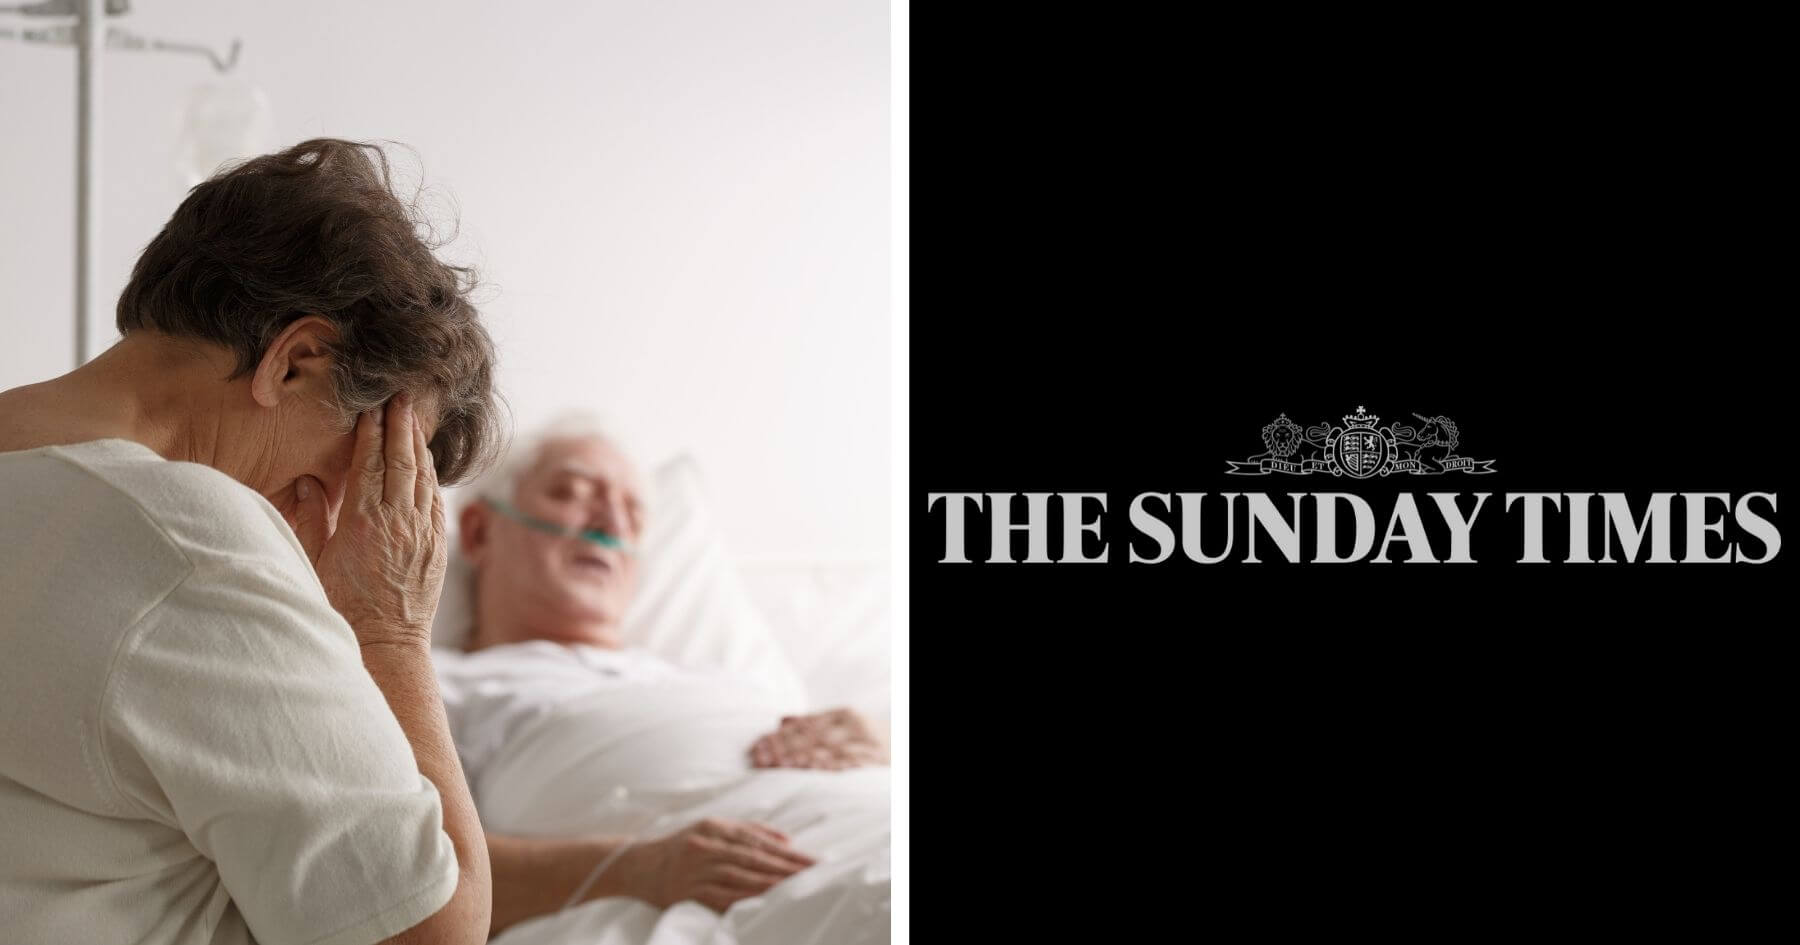 Sunday Times launch campaign to legalise assisted suicide